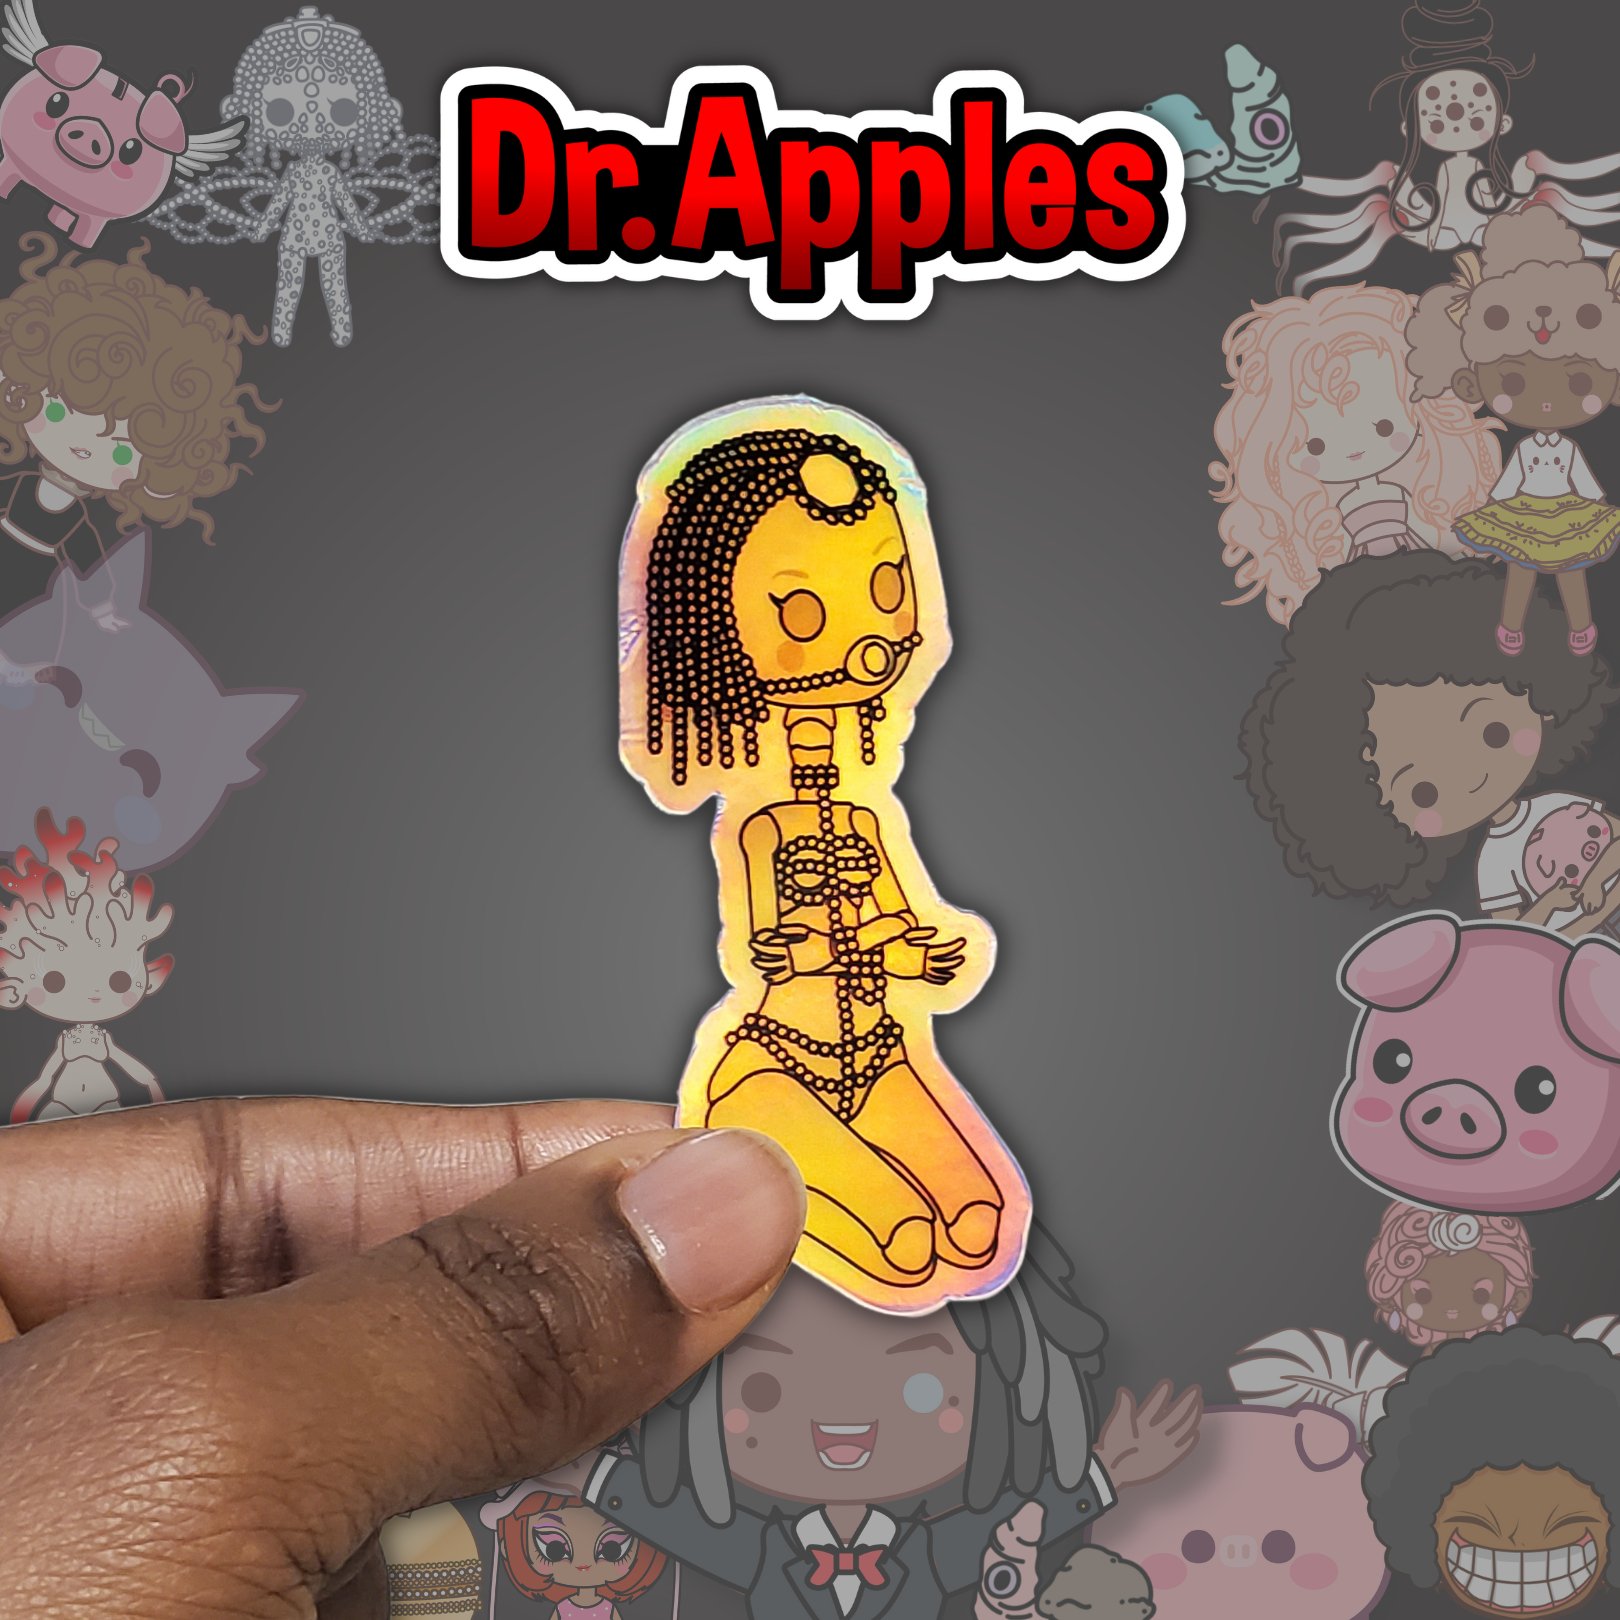 Dr Apples, Fictional Fantasy Folklore, Dr. Apples African American, animation, screenwriting, lacye, lacye a brown, fictional podcast, piggybanks,  african american business (3).jpg